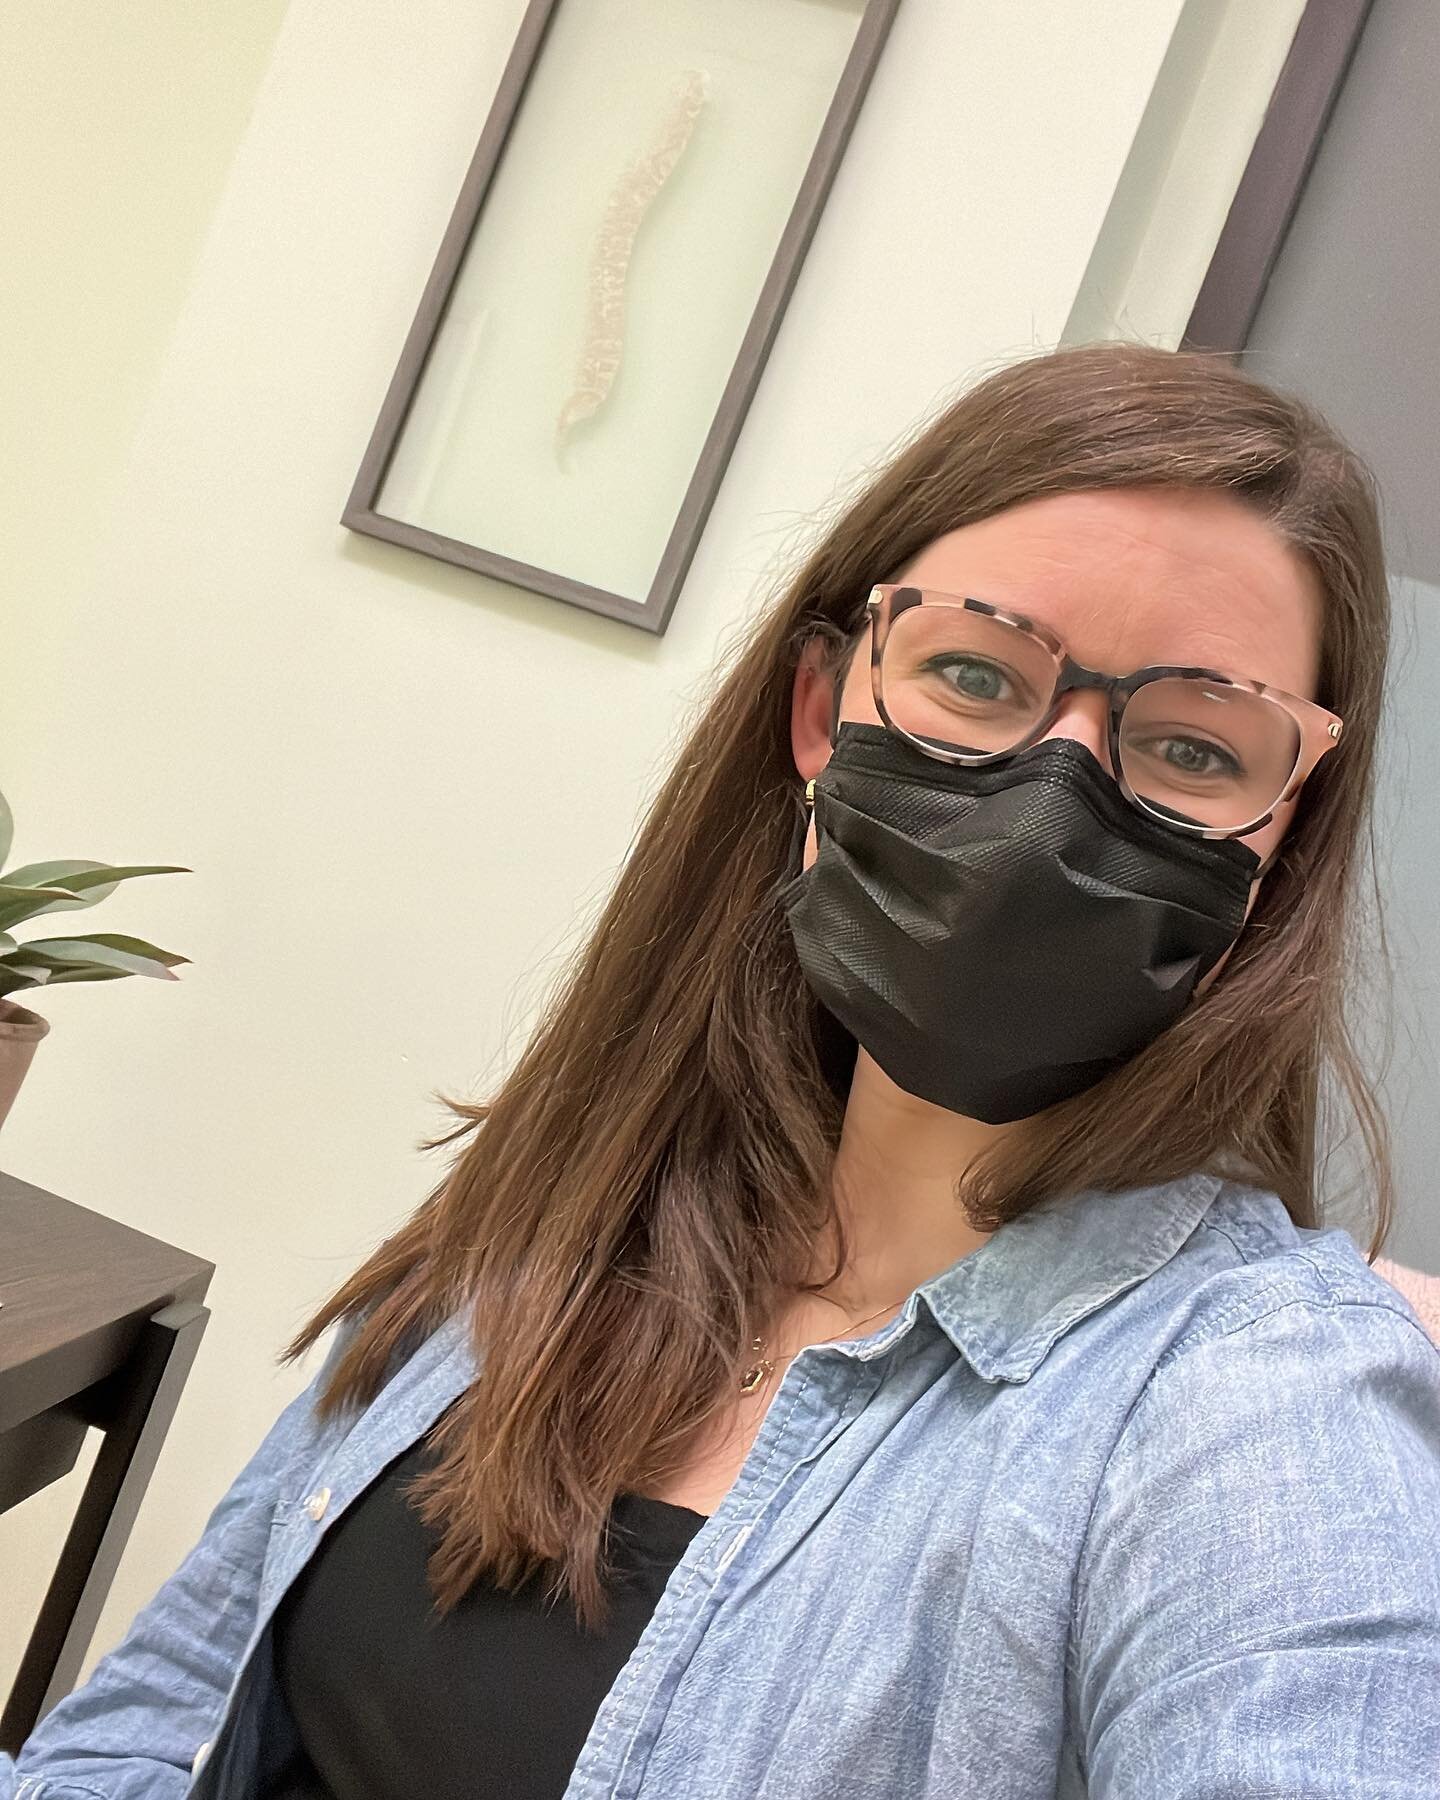 Masking Update

On June 8th 2022 the Ontario Ministry of Health and the Chief Medical Officer of Health announced that effective June 11th the remaining provincial masking requirements will be lifted in Ontario (except for long-term care and retireme